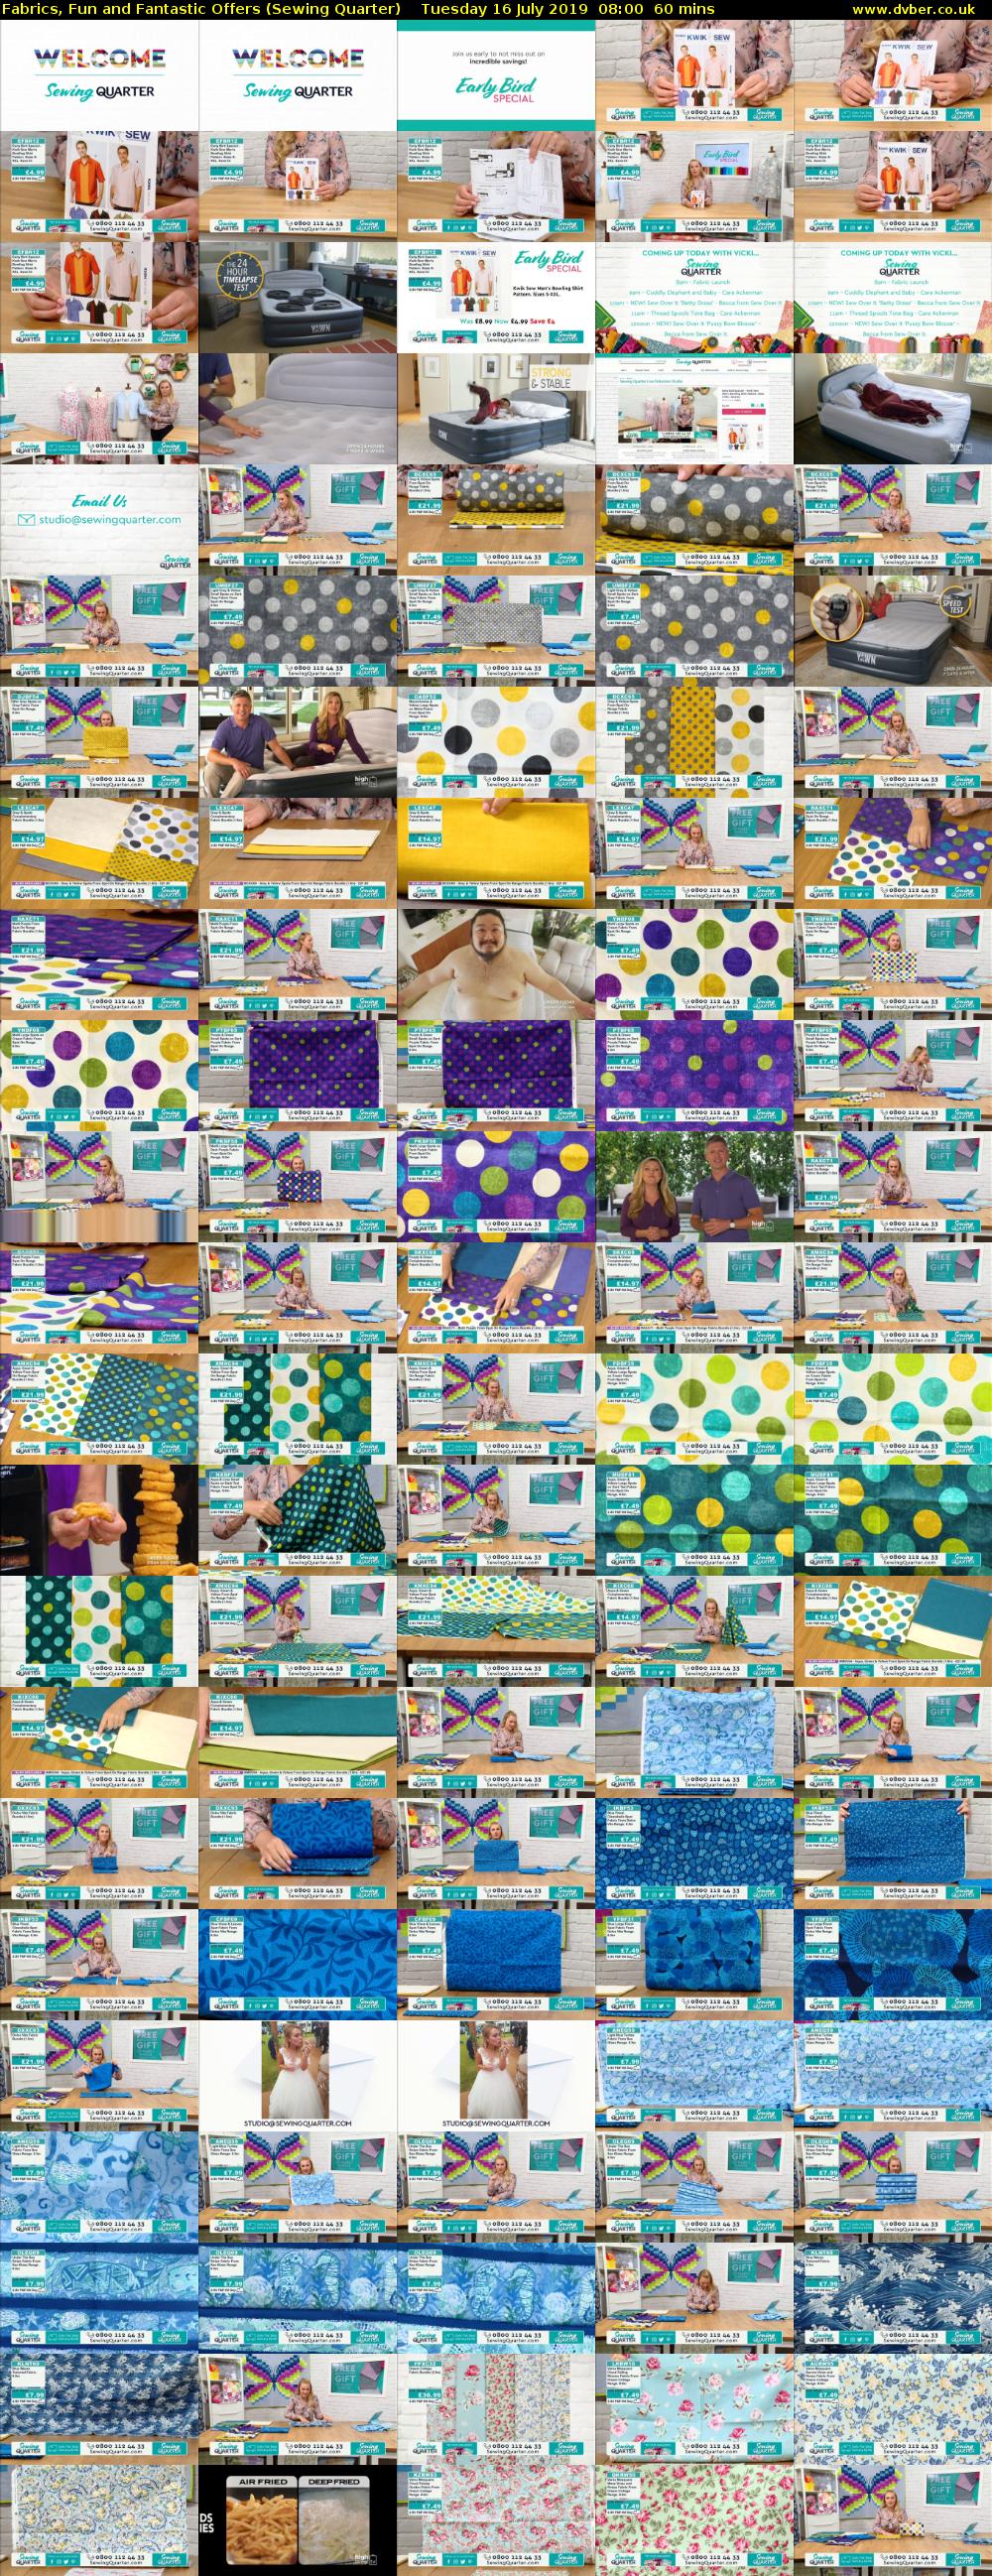 Fabrics, Fun and Fantastic Offers (Sewing Quarter) Tuesday 16 July 2019 08:00 - 09:00